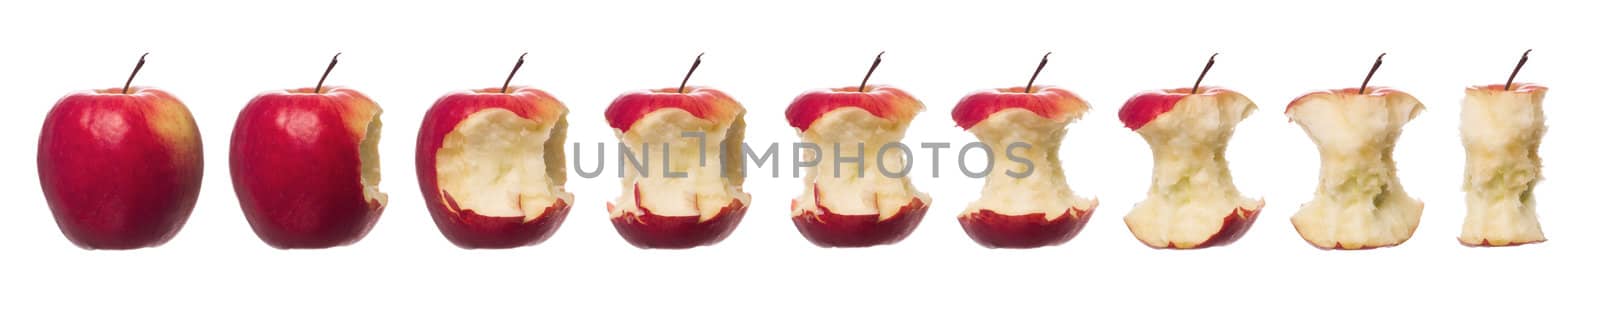 Red apples in progress towards white background